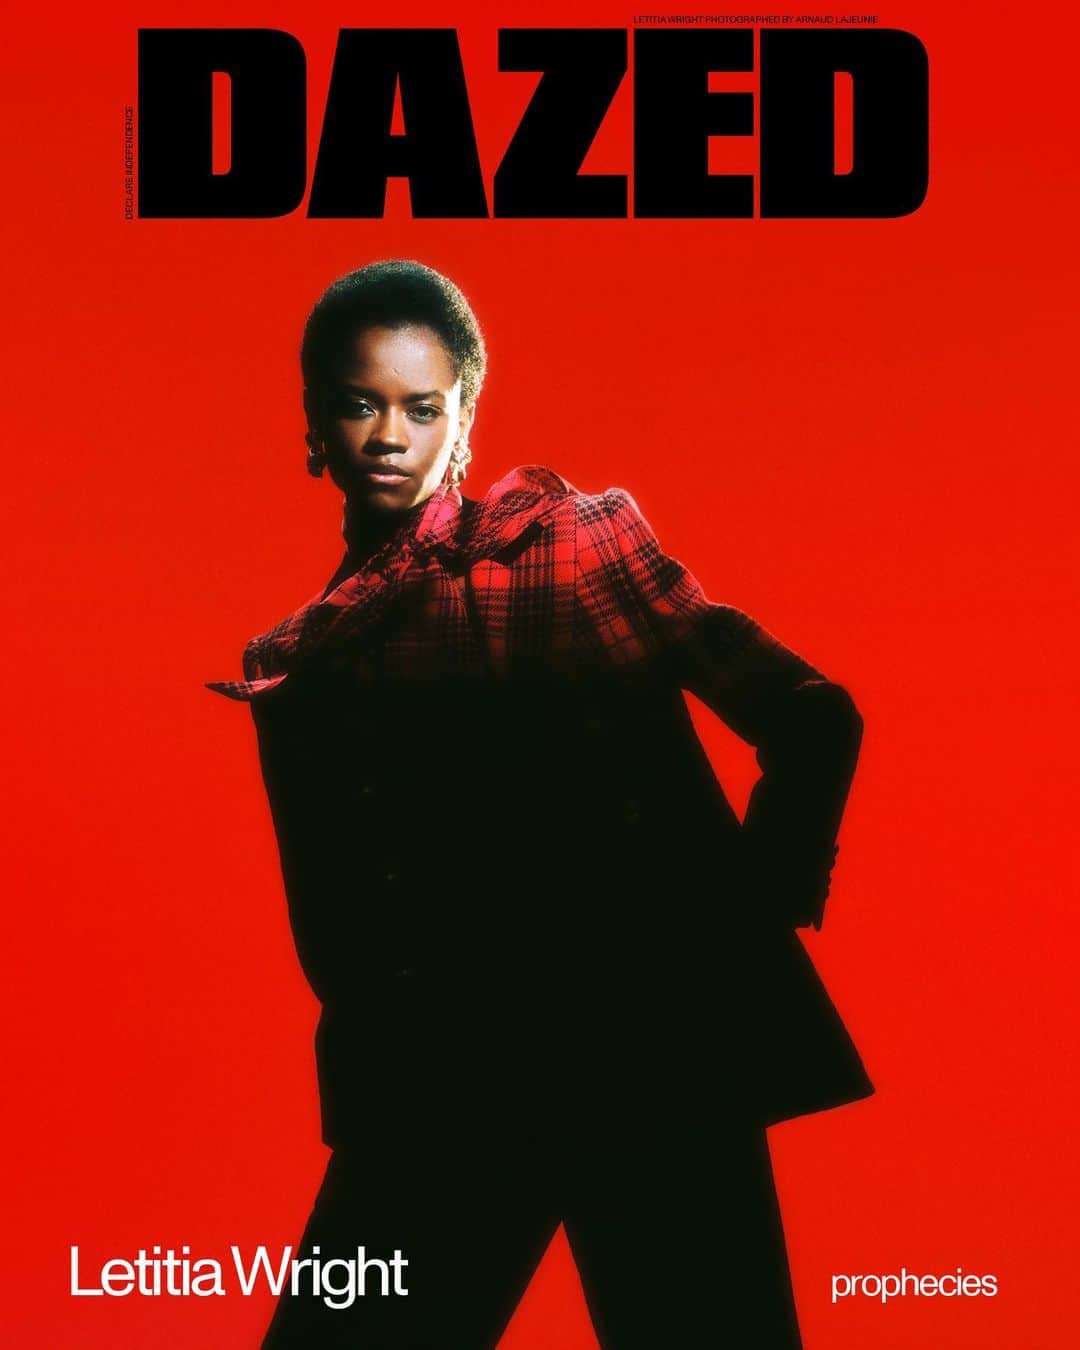 letitiawrightのインスタグラム：「prophecies.  @dazed x #smallaxe   Last cover of 2020.」